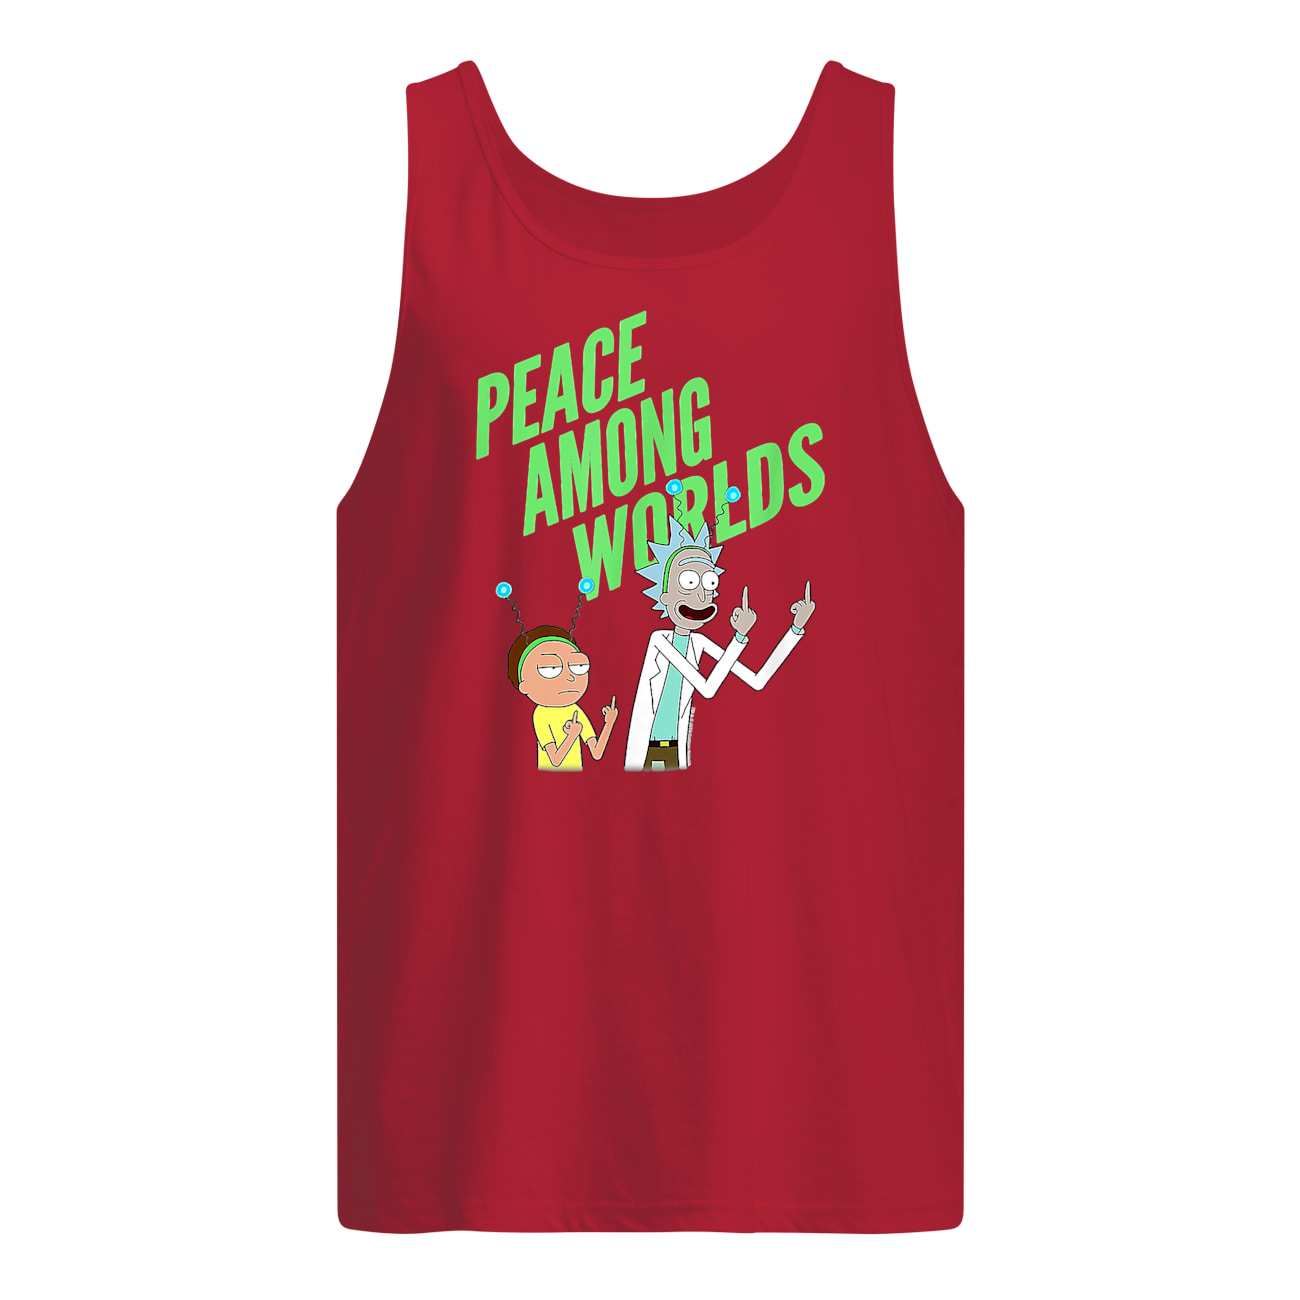 Rick and morty peace among worlds tank top